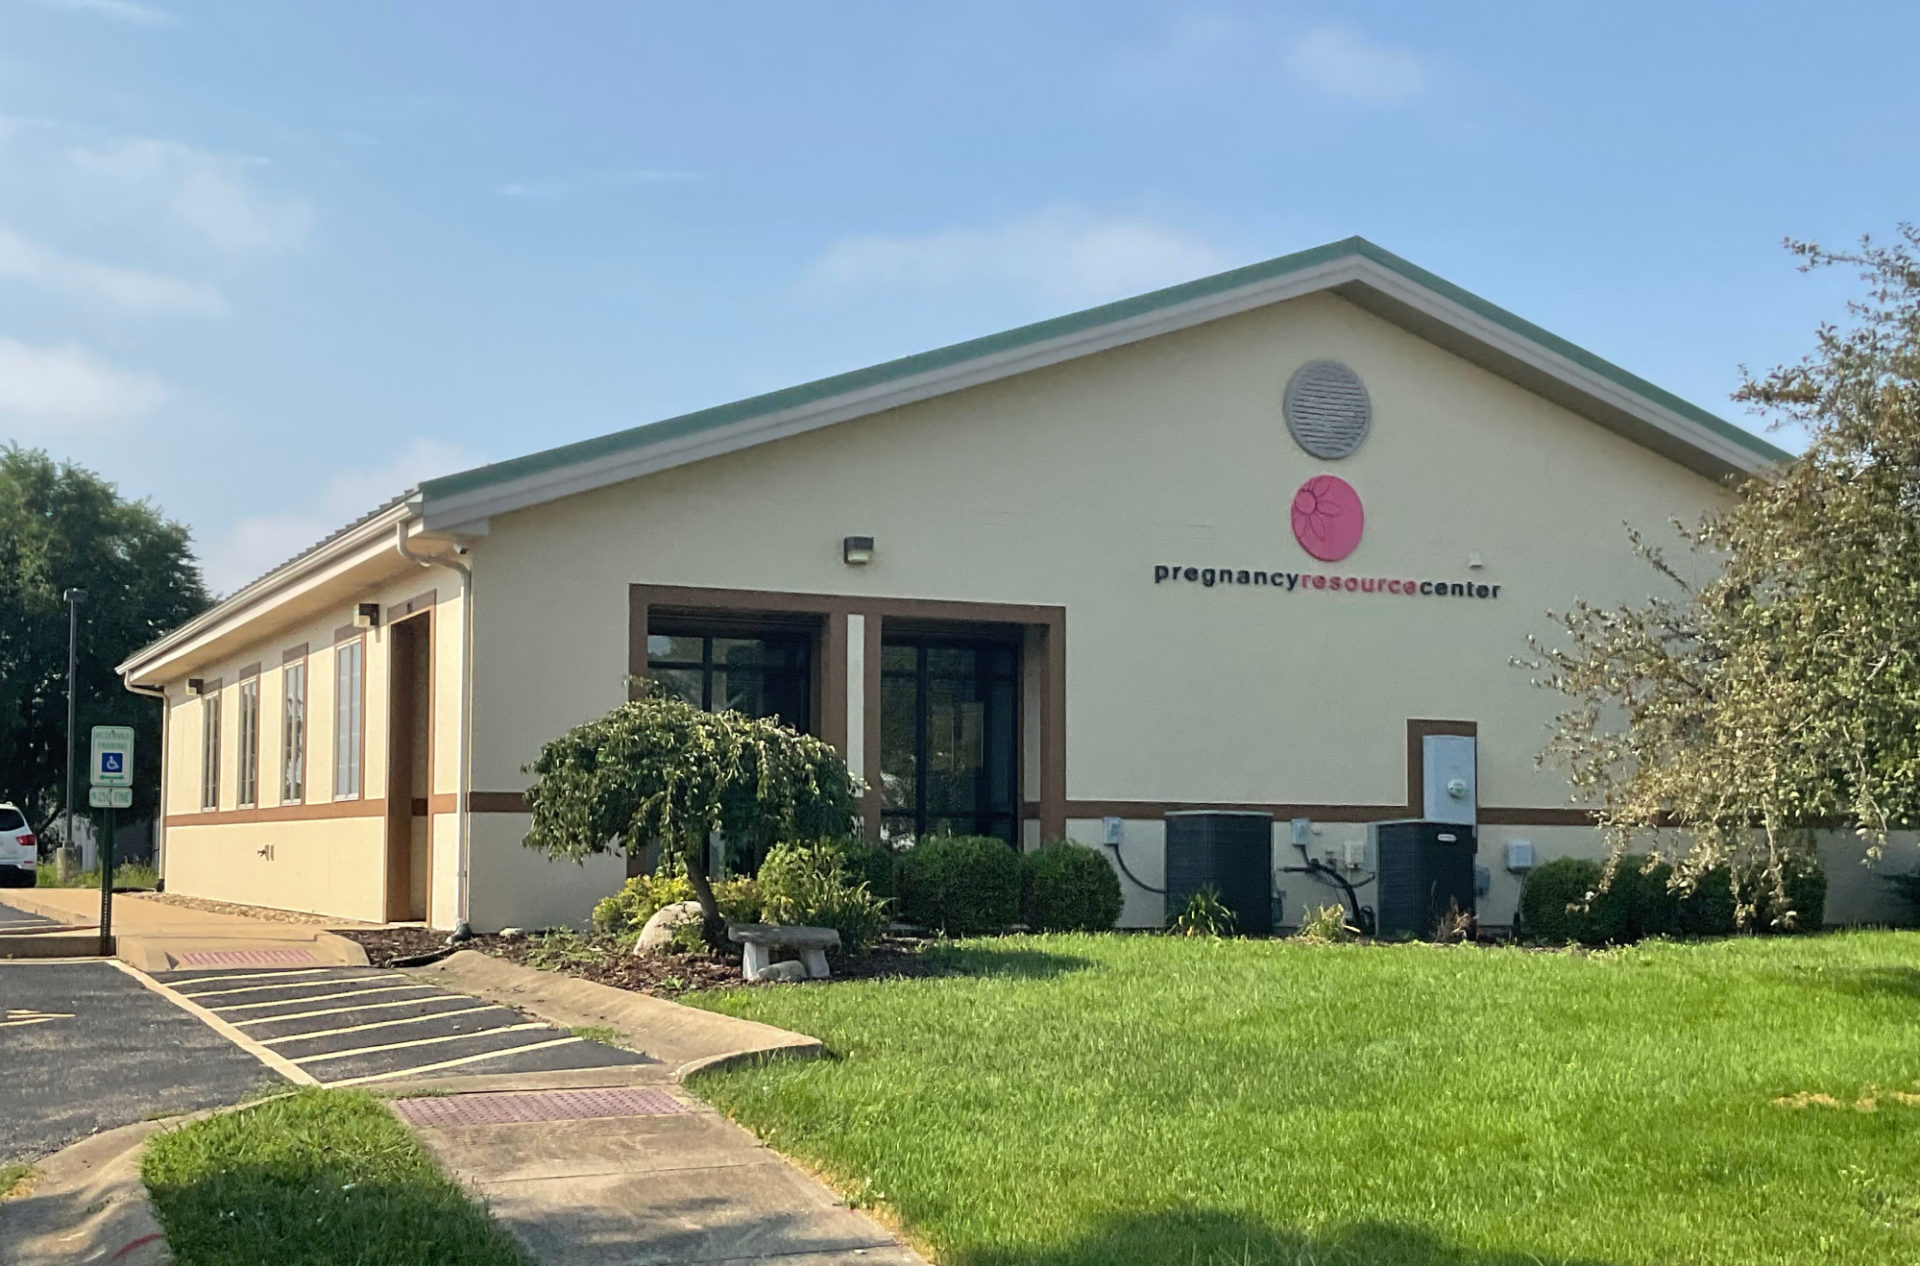 The Pregnancy Resource Center in Champaign is an anti-abortion clinic. A cream colored building with brown trim. There is a pink logo on the side of the building with the words pregnancy resource center underneath.